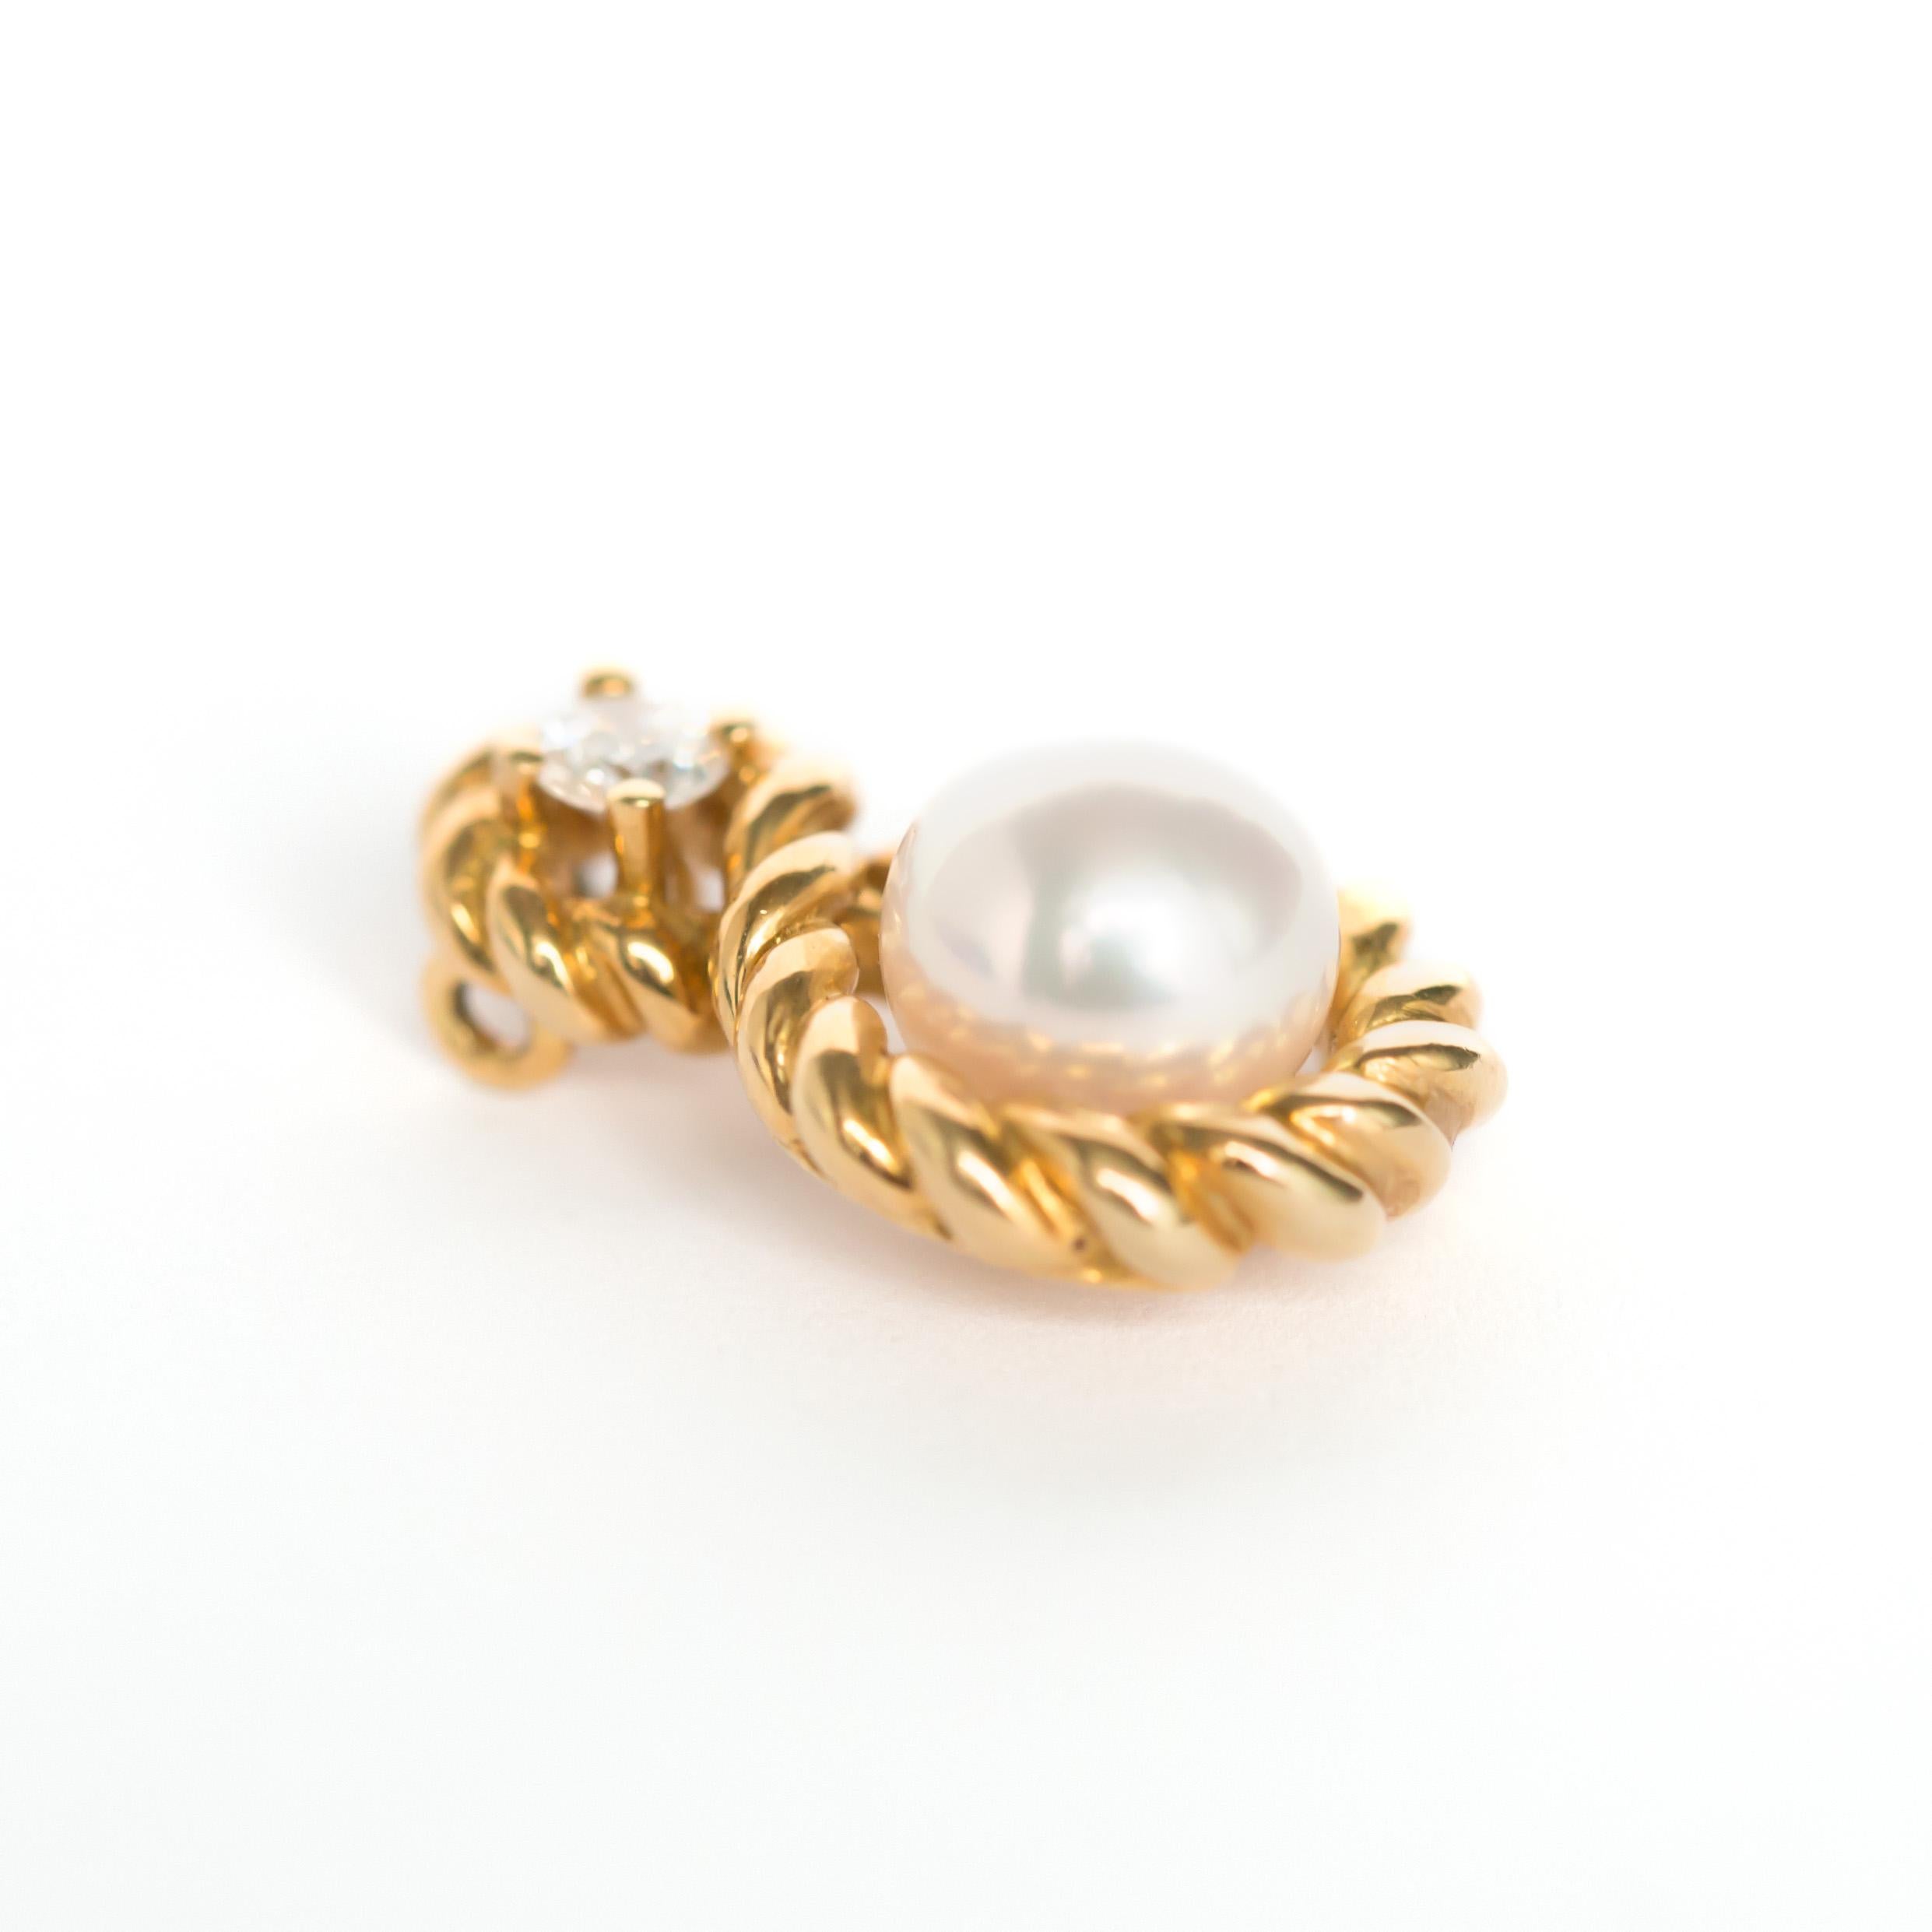 Length: .35 inches 
Metal Type: 18 karat Yellow Gold 
Weight: 3.1 grams

Center Diamond Details
Type: Natural Cultured Pearl 
7mm

Side Stone Details: 
Shape: Round Brilliant 
Total Carat Weight: .10 carat
Color: F
Clarity: VS1